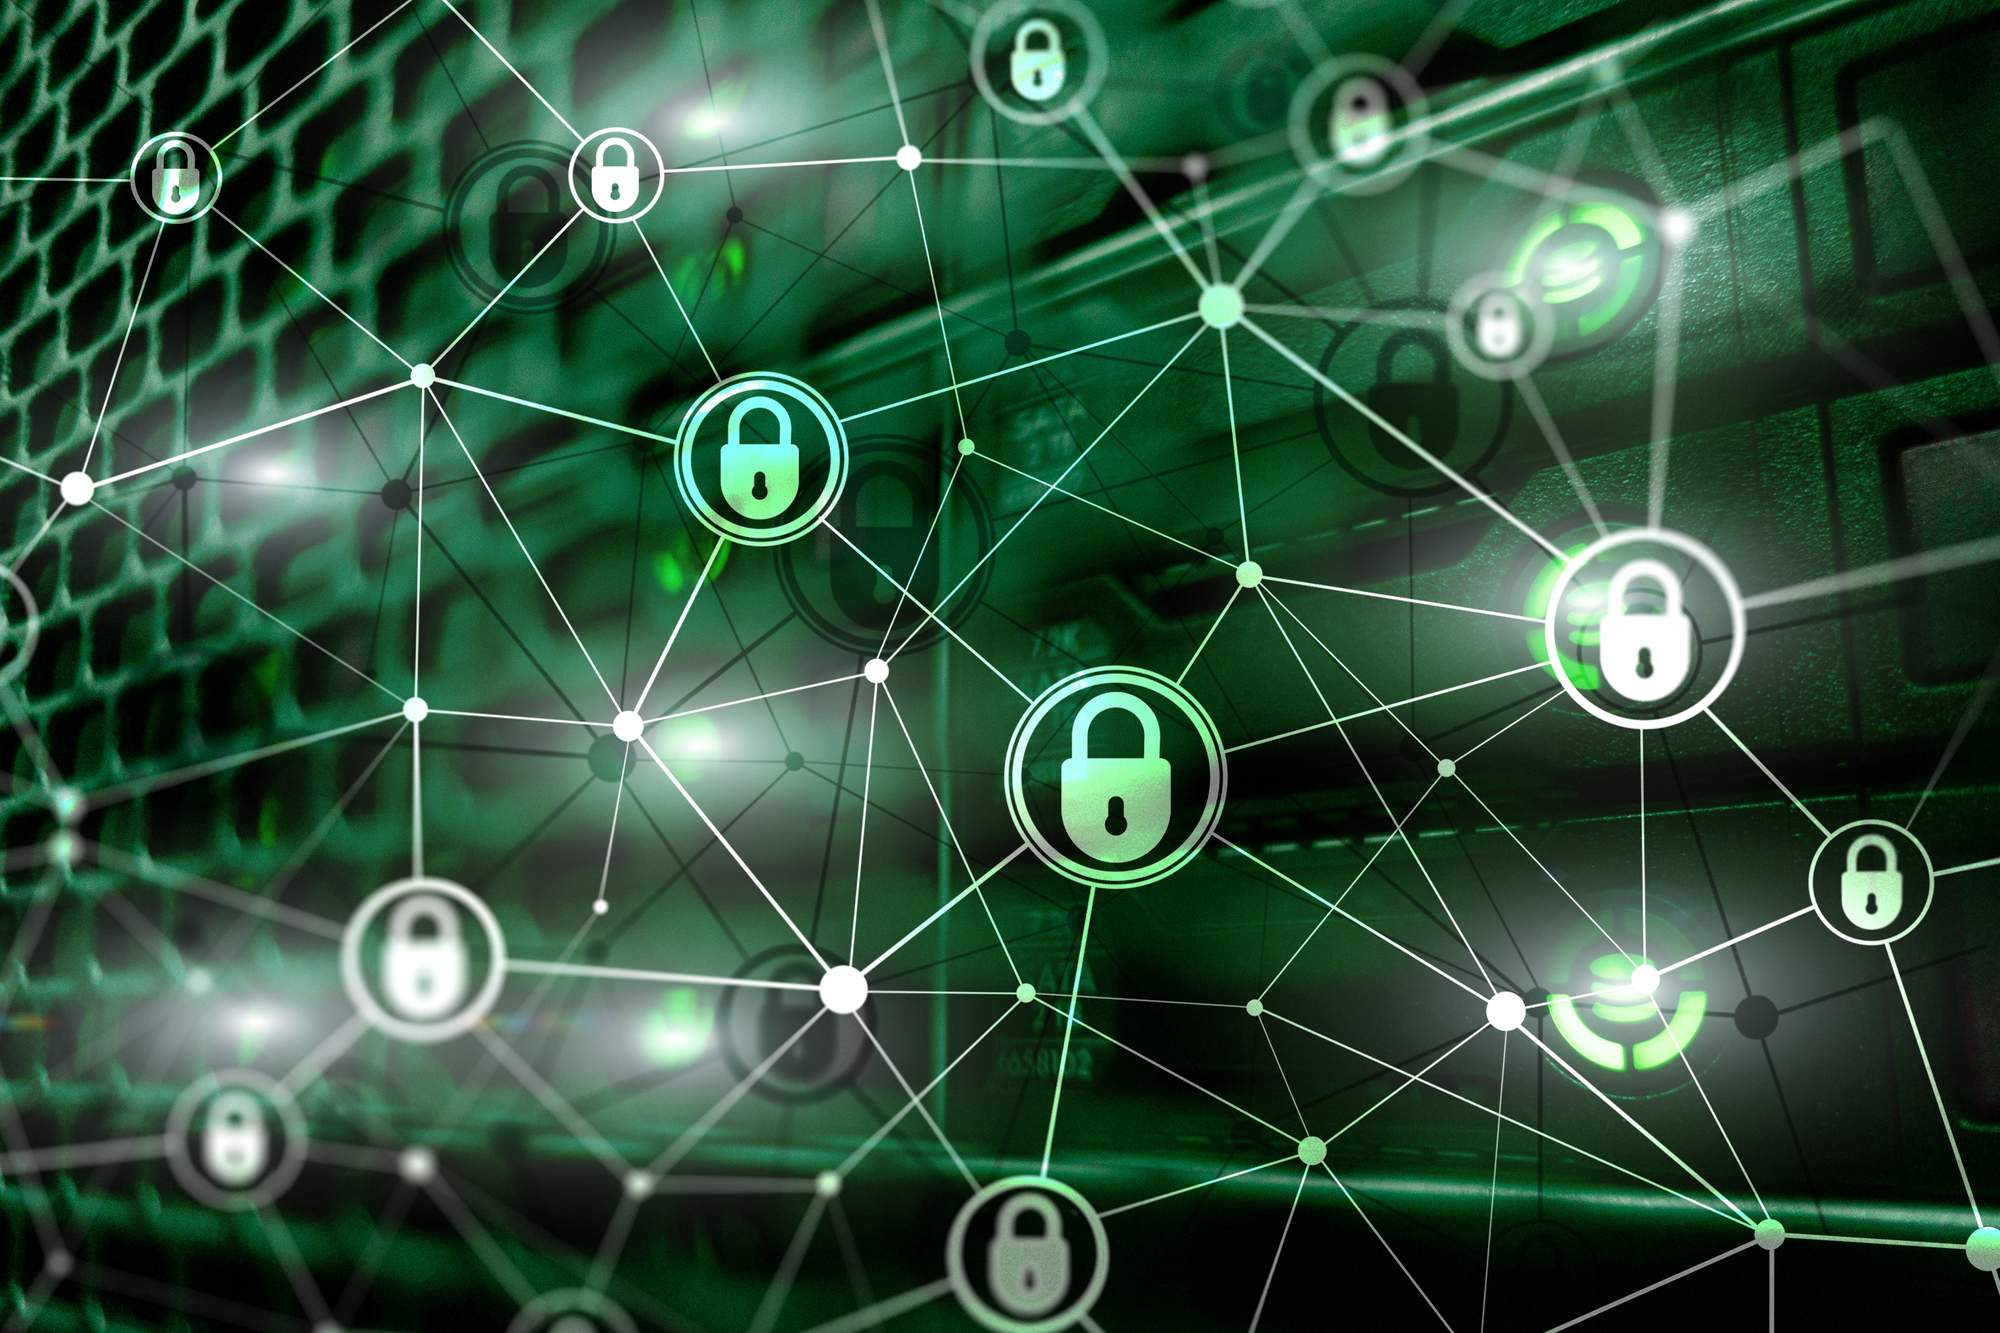 Network Security concept with locks in green showing they're secure